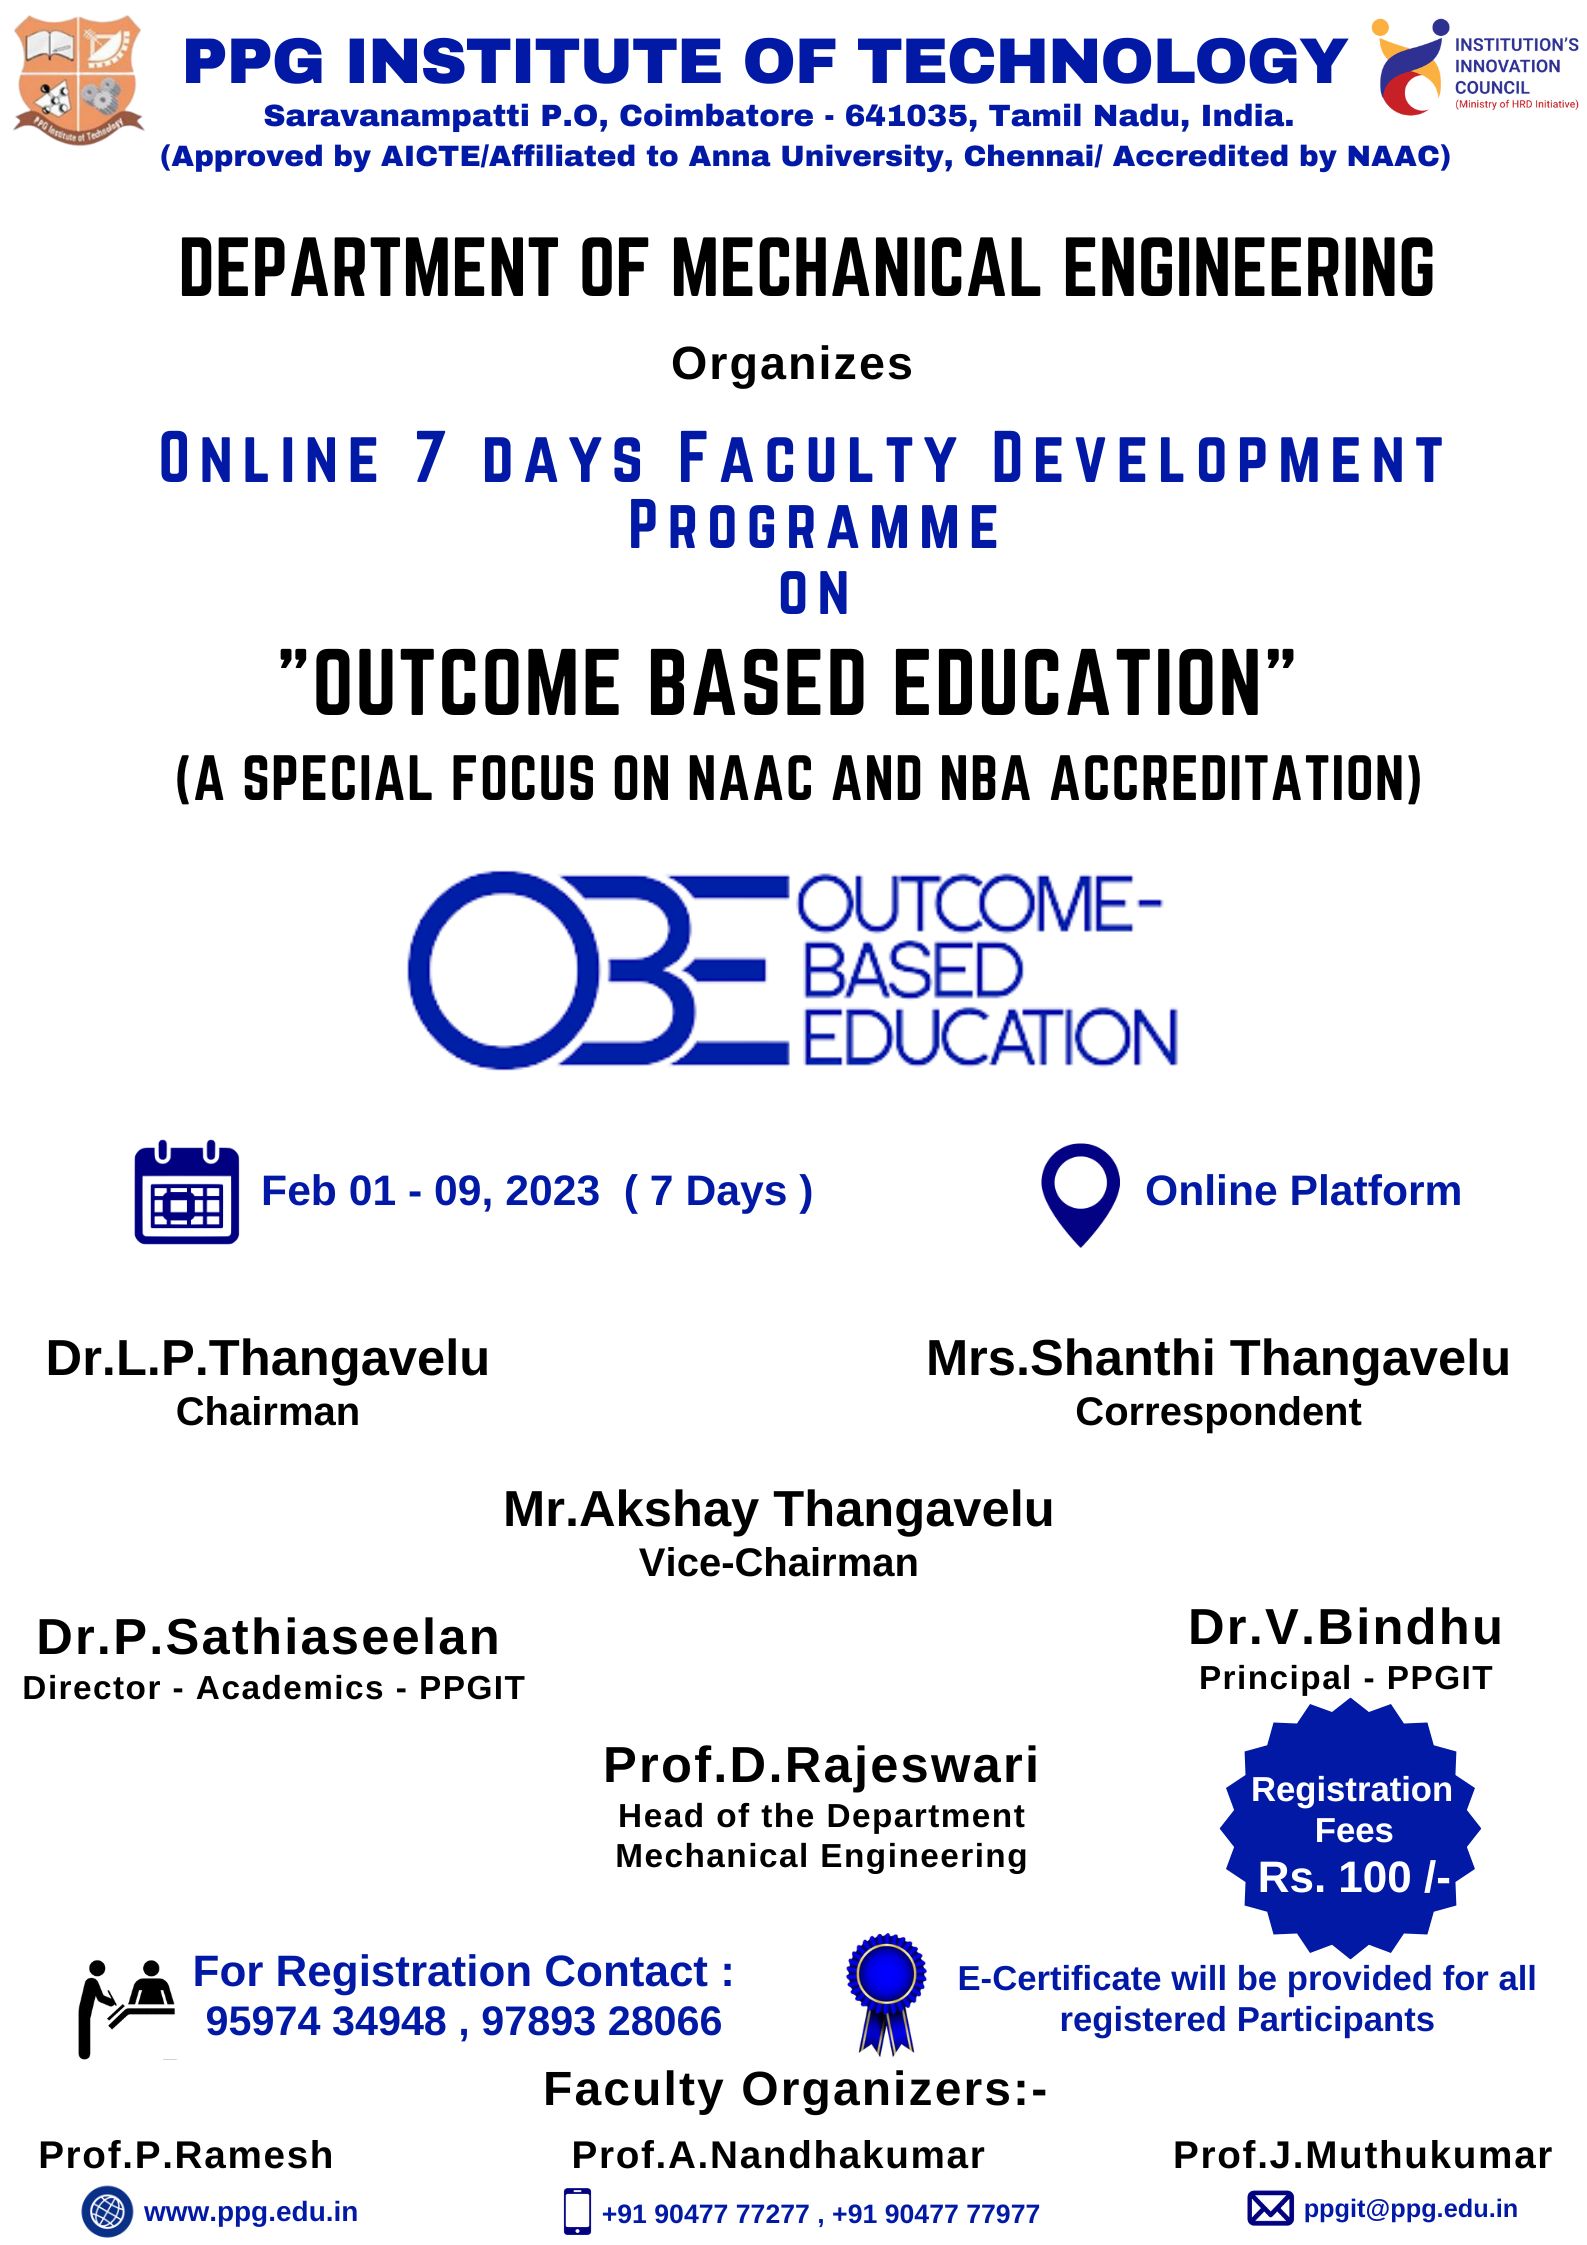 Faculty Development Program on Outcome Based Education 2023